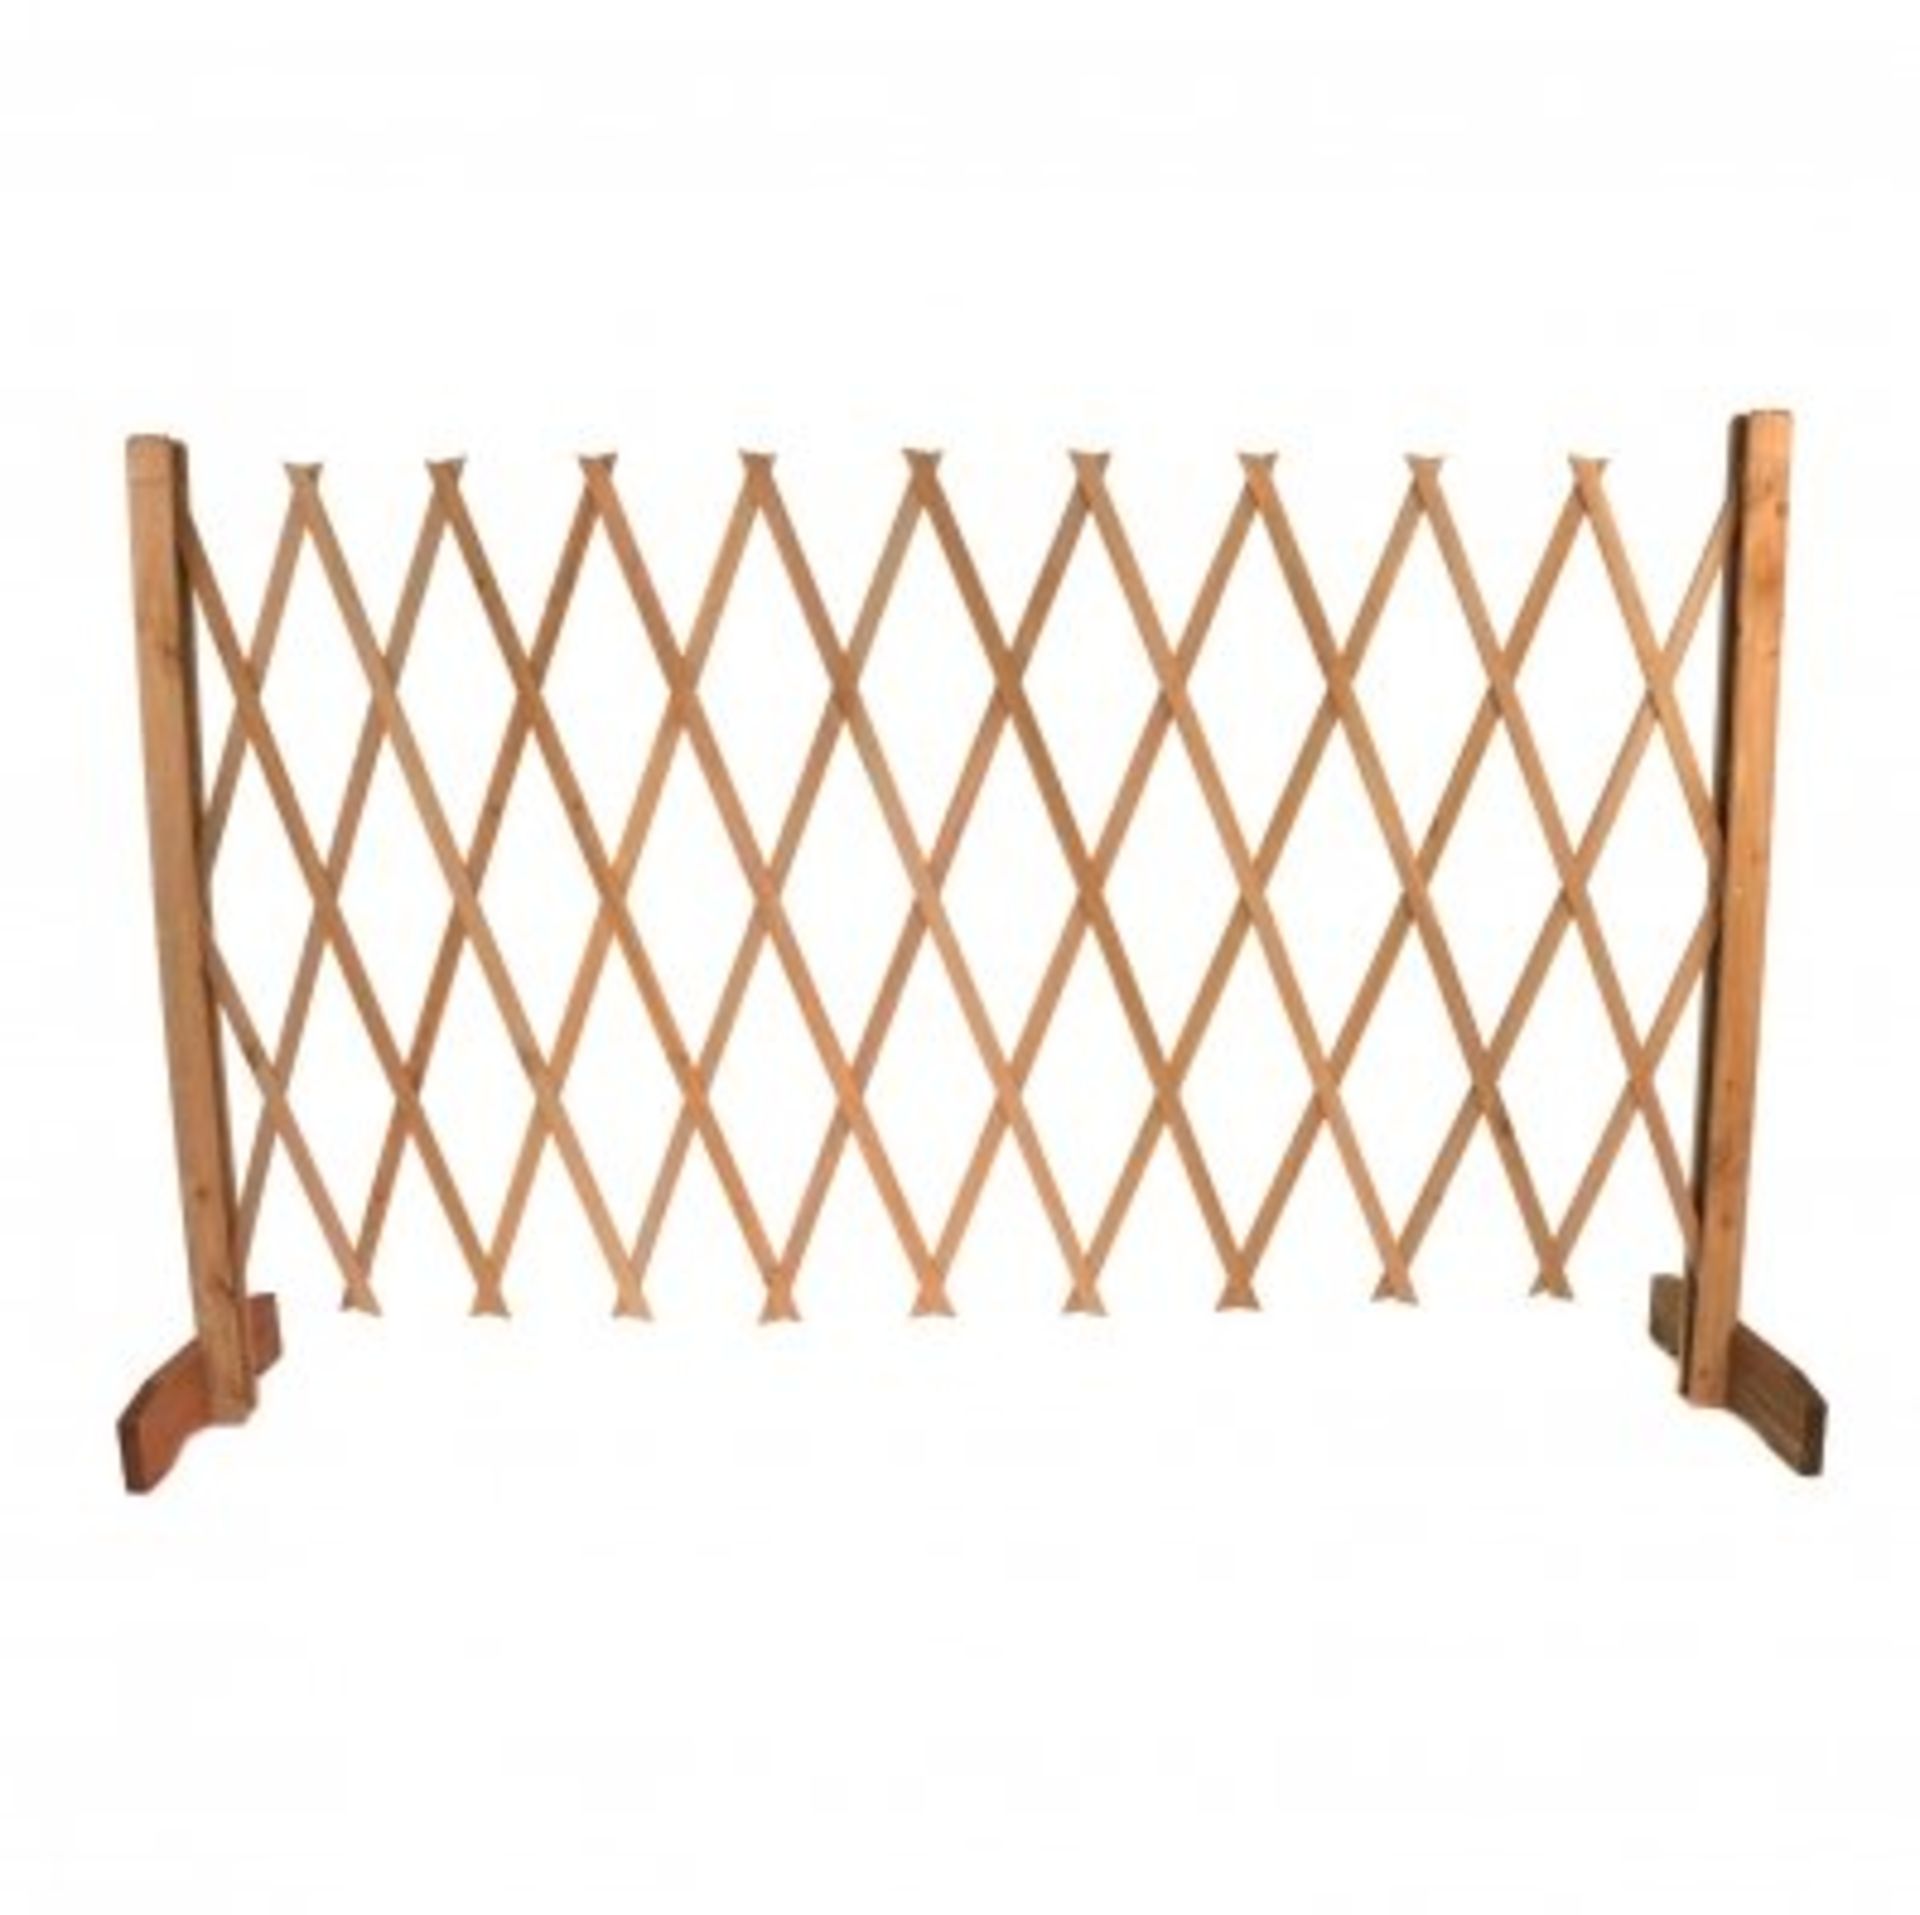 (RU65) Arched Expanding Freestanding Wooden Trellis Fence Garden Screen Add some style to yo...